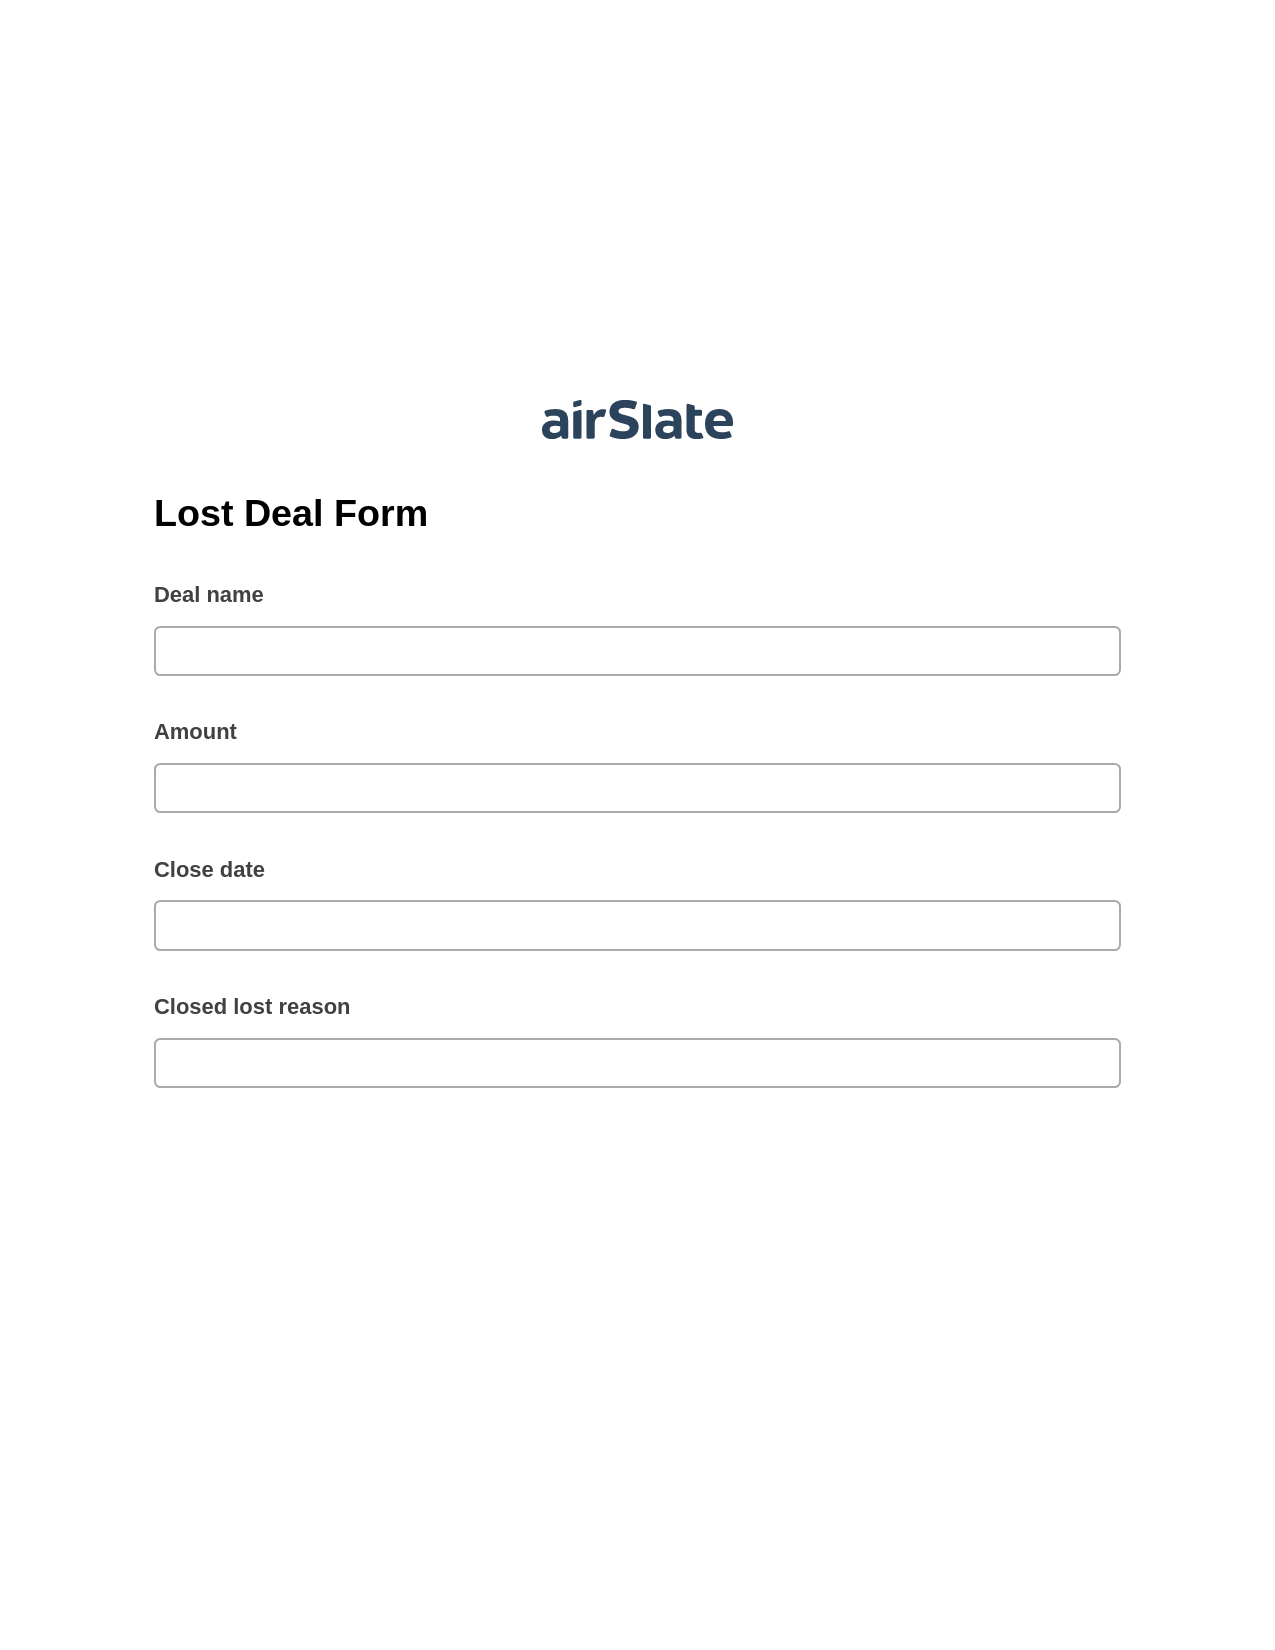 Multirole Lost Deal Form Pre-fill from CSV File Bot, Remove Slate Bot, Export to WebMerge Bot